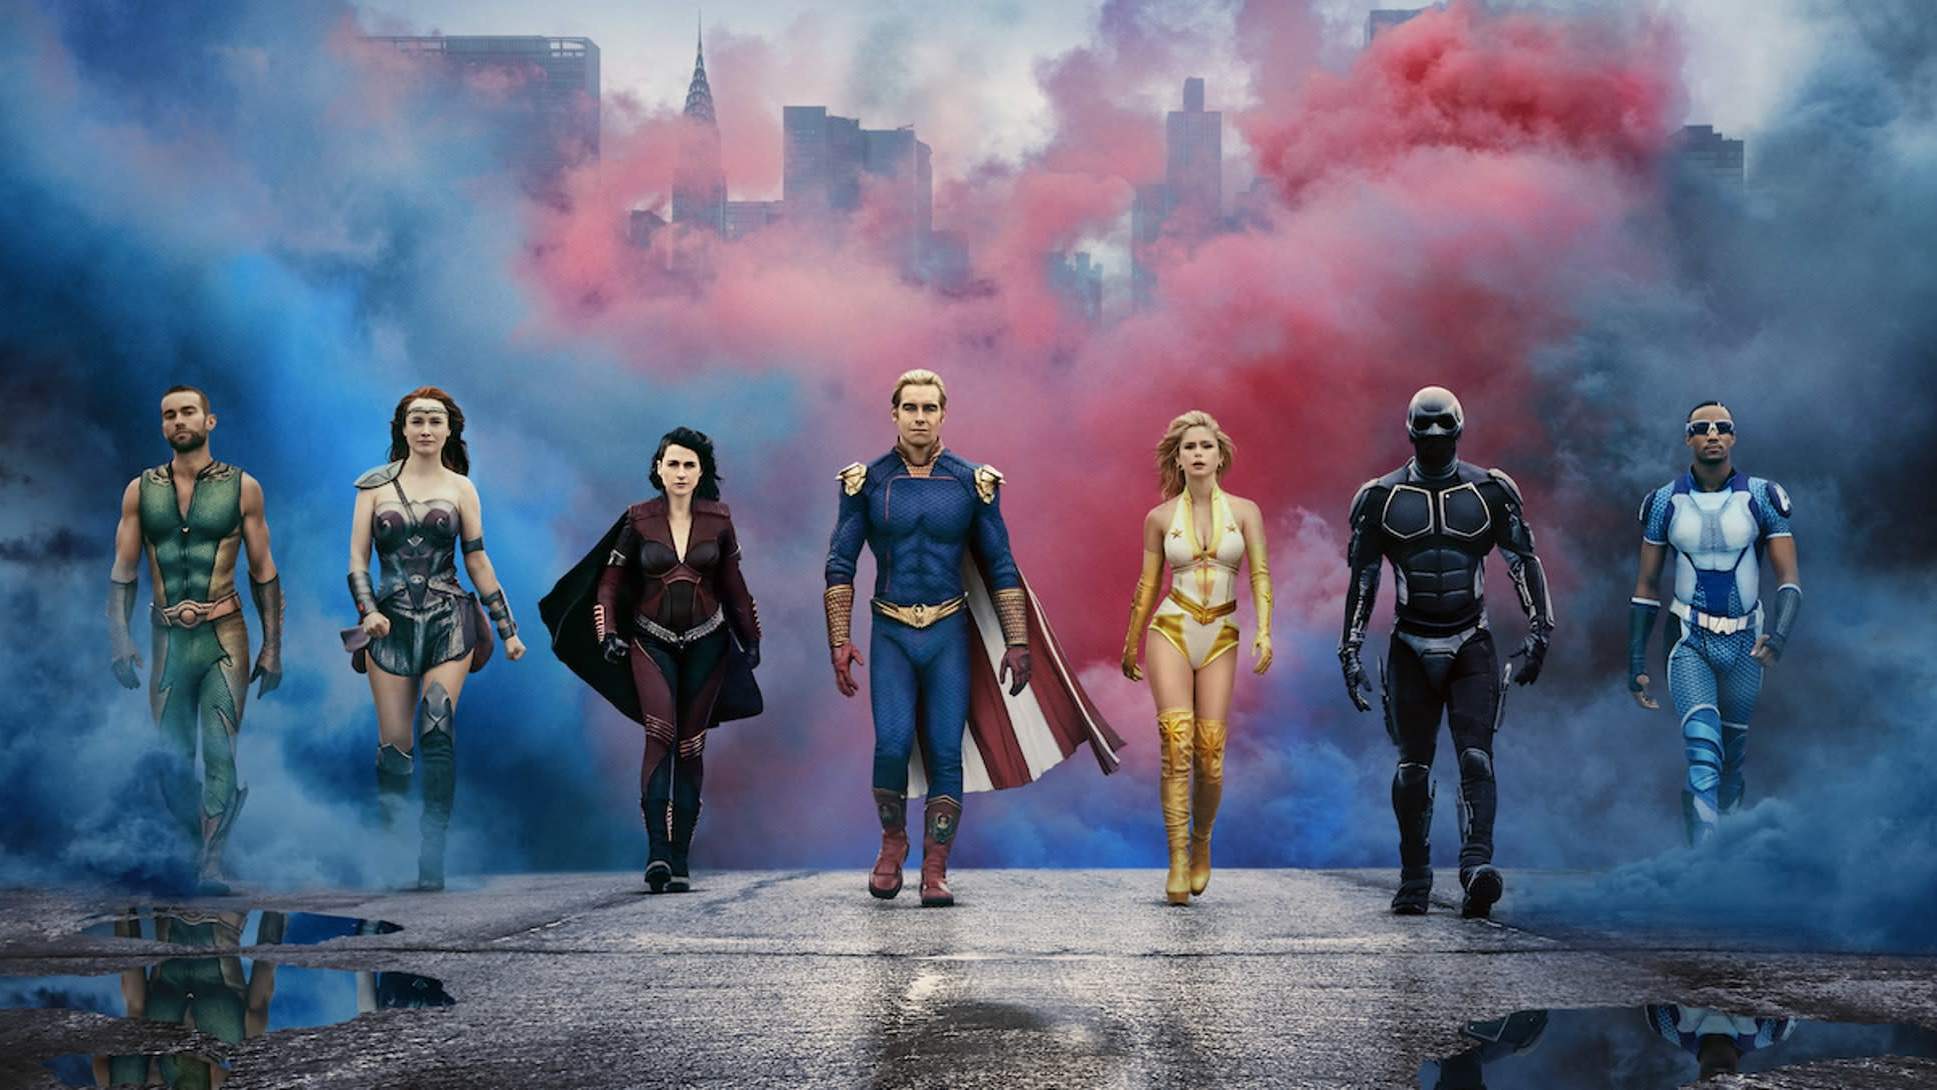 These superheroes carry a lot of baggage. (Image: Amazon Studios)